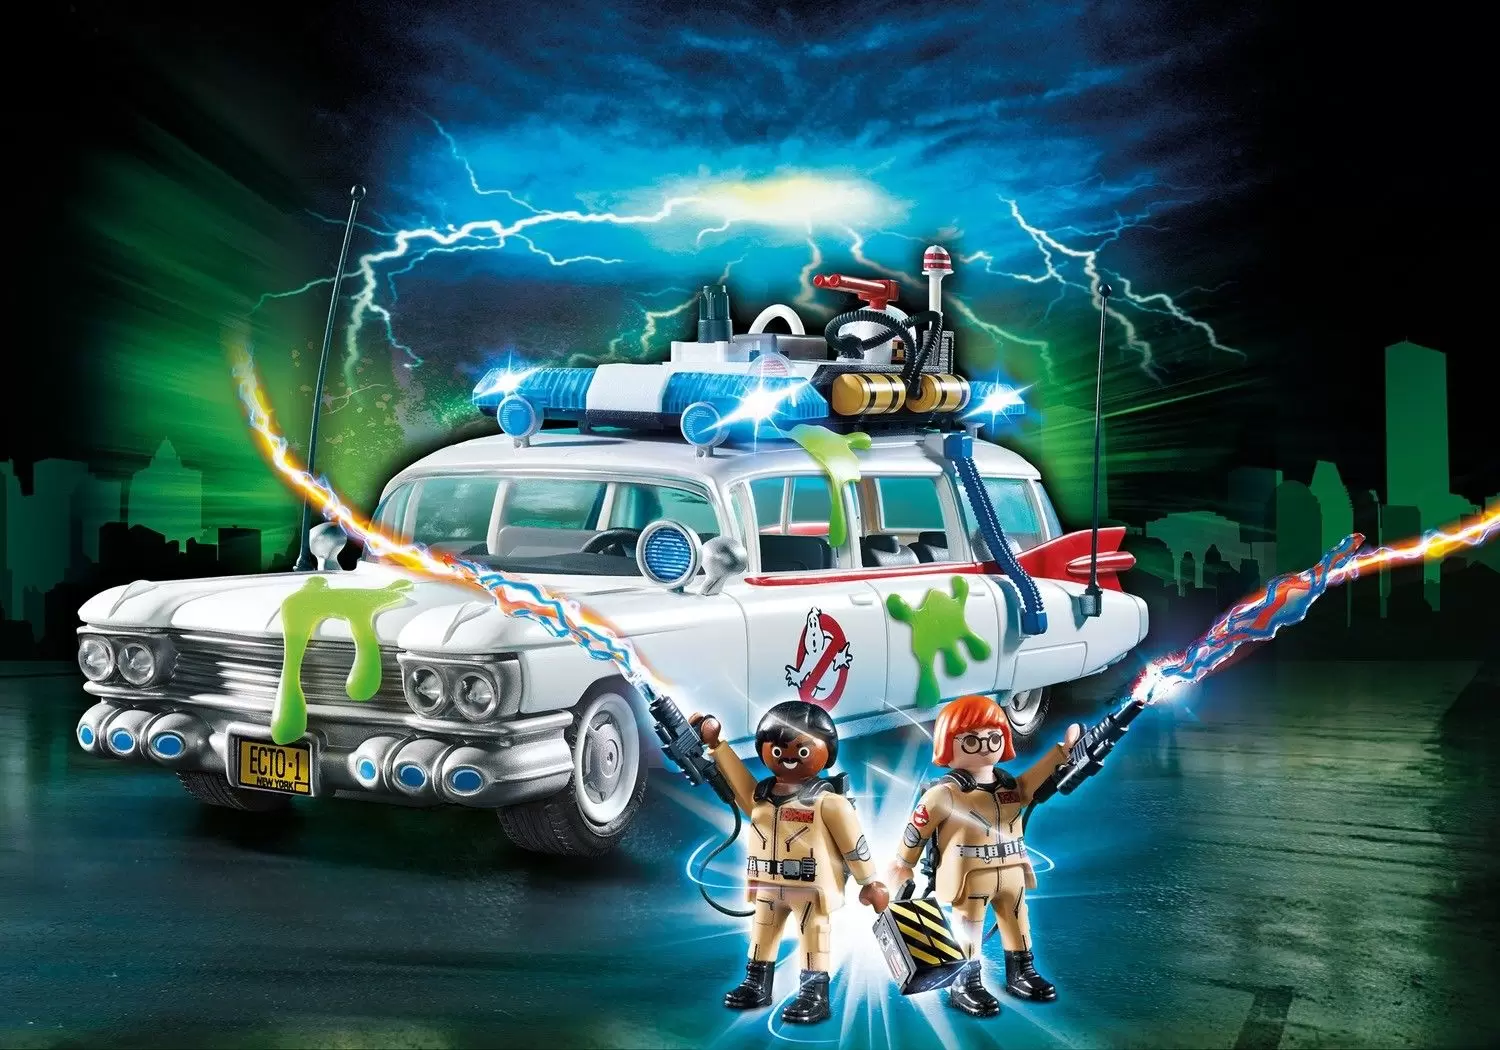 Playmobil Ghosbusters - Ghostbusters Ecto-1